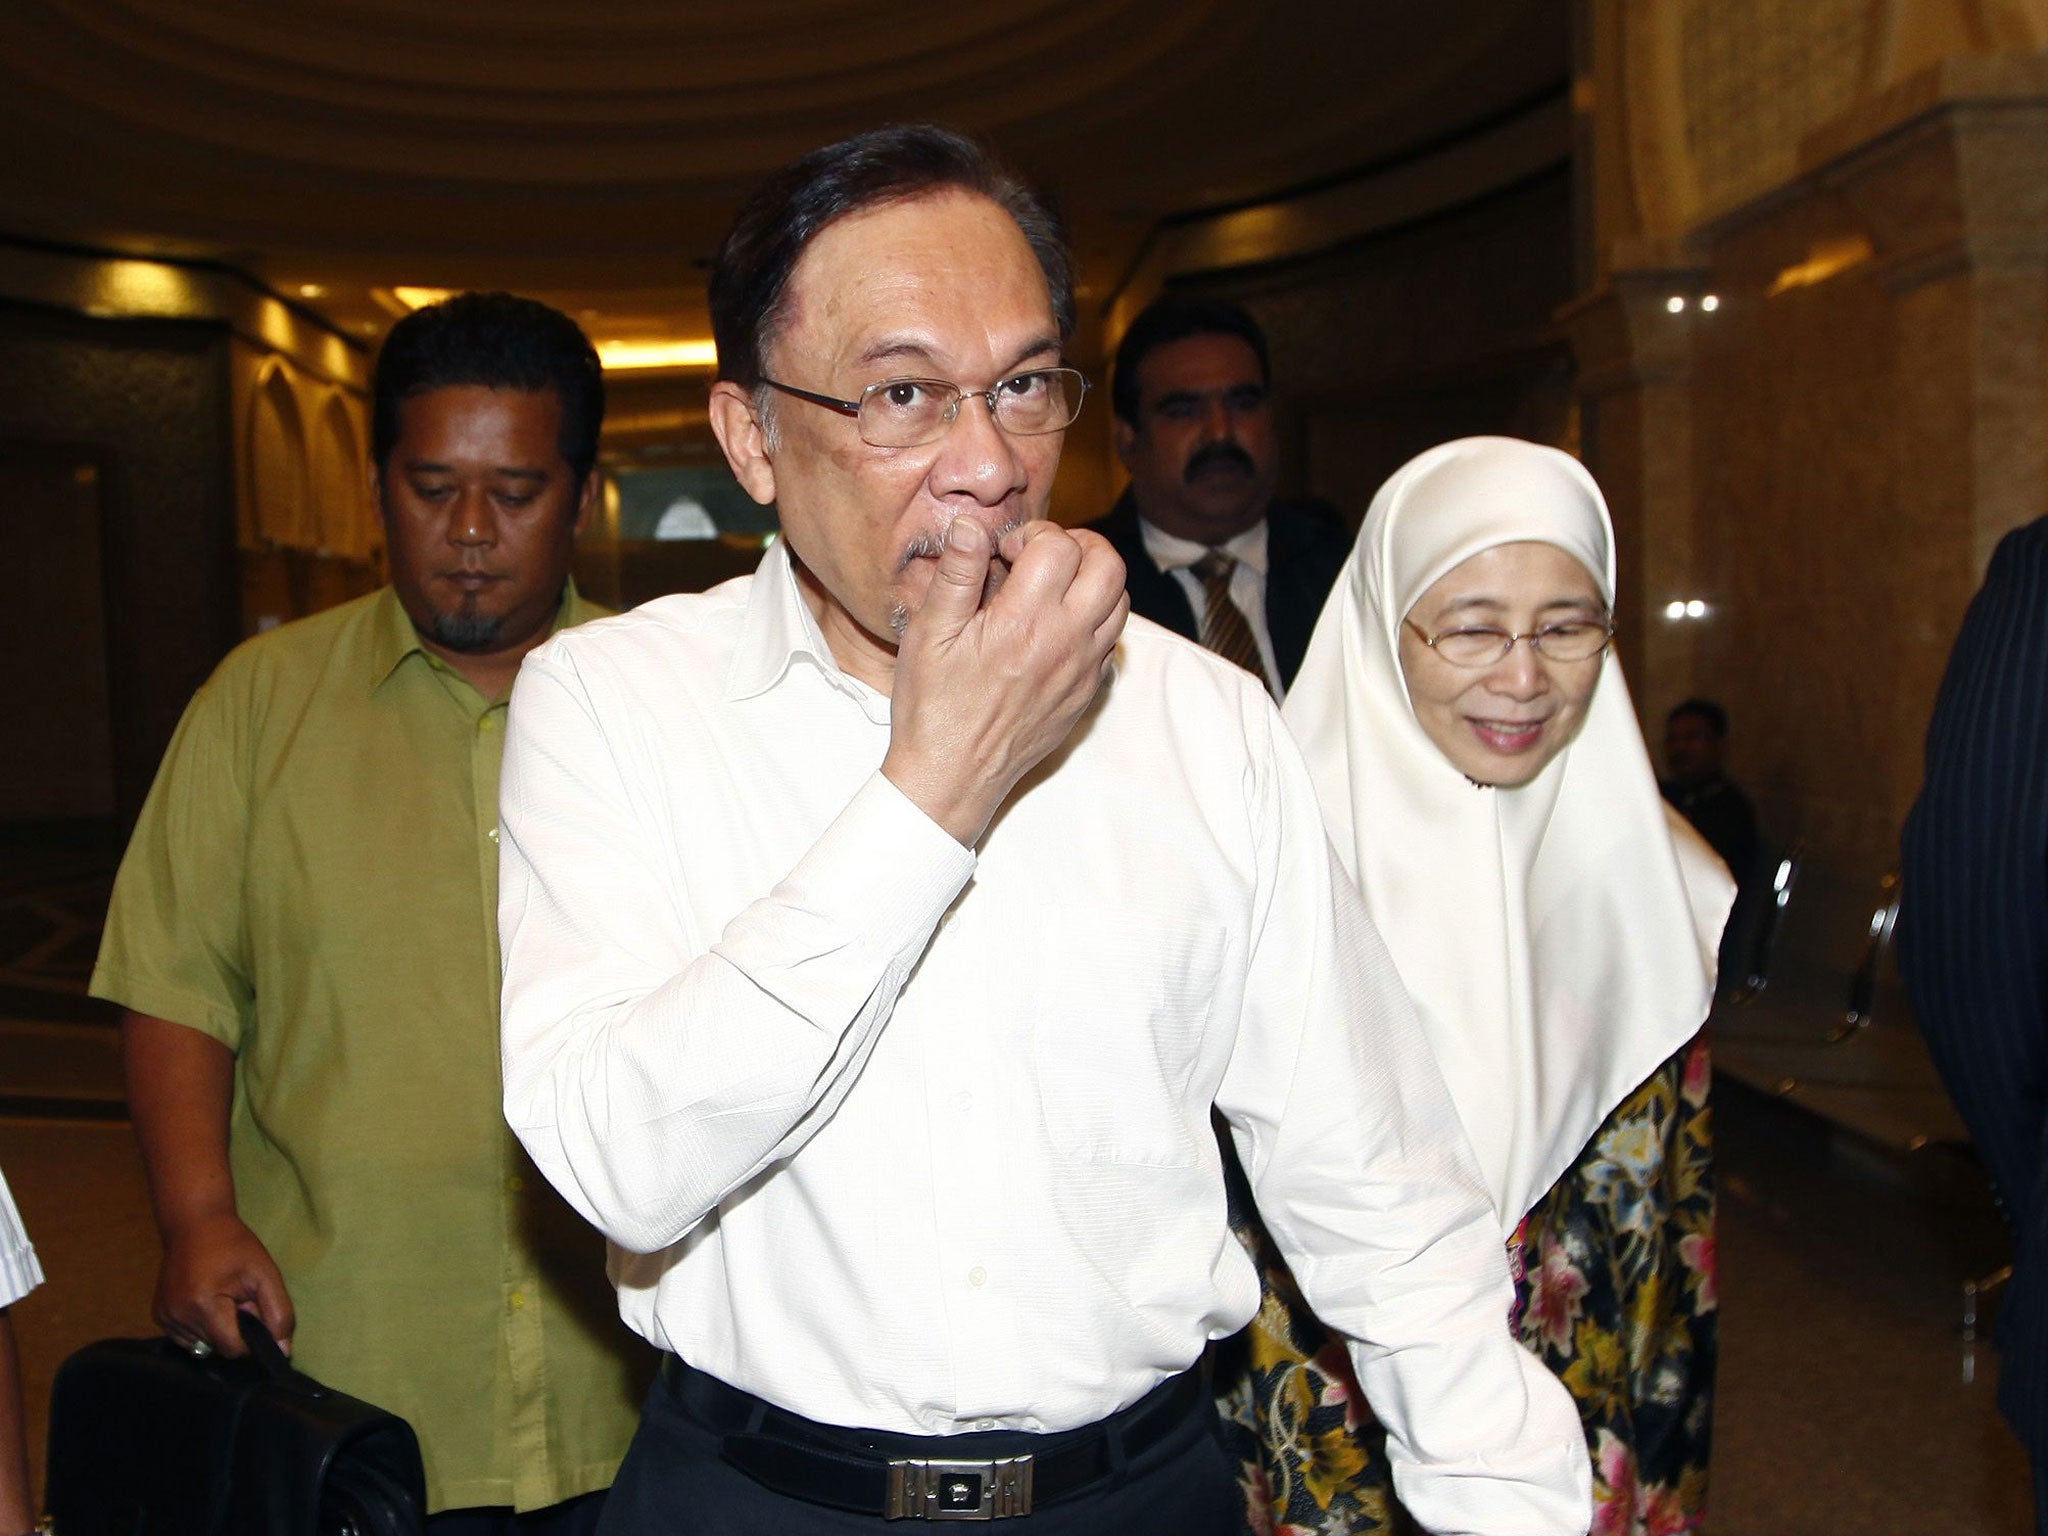 Malaysian opposition leader Anwar Ibrahim (C) and his wife Wan Azizah arrive at a court house in Putrajaya March 7, 2014.